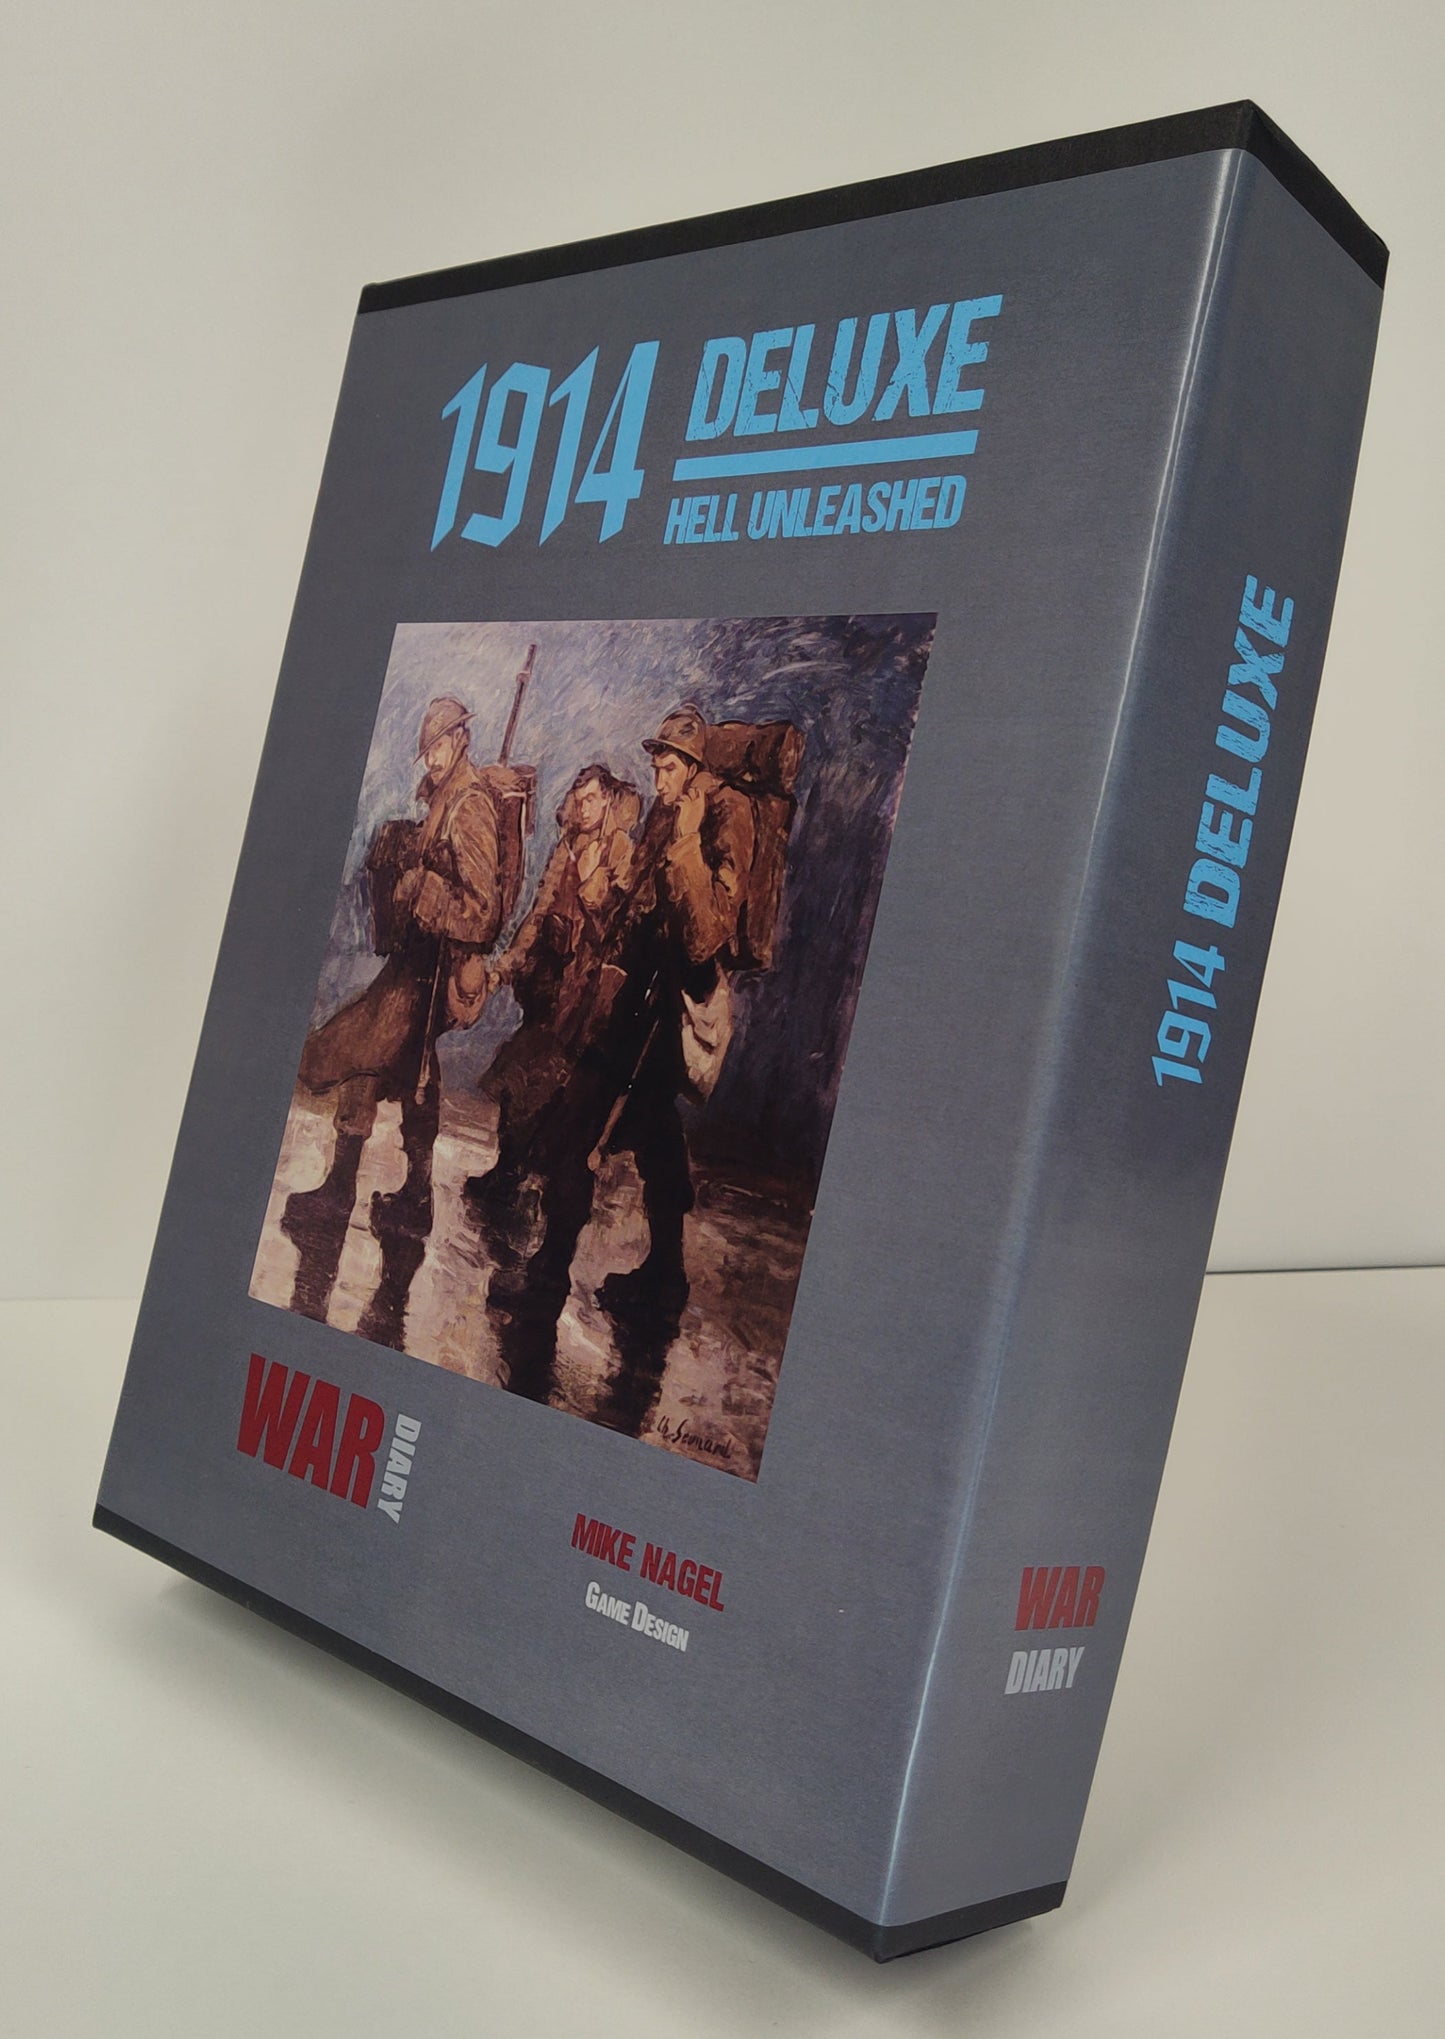 1914 Deluxe: Hell Unleashed